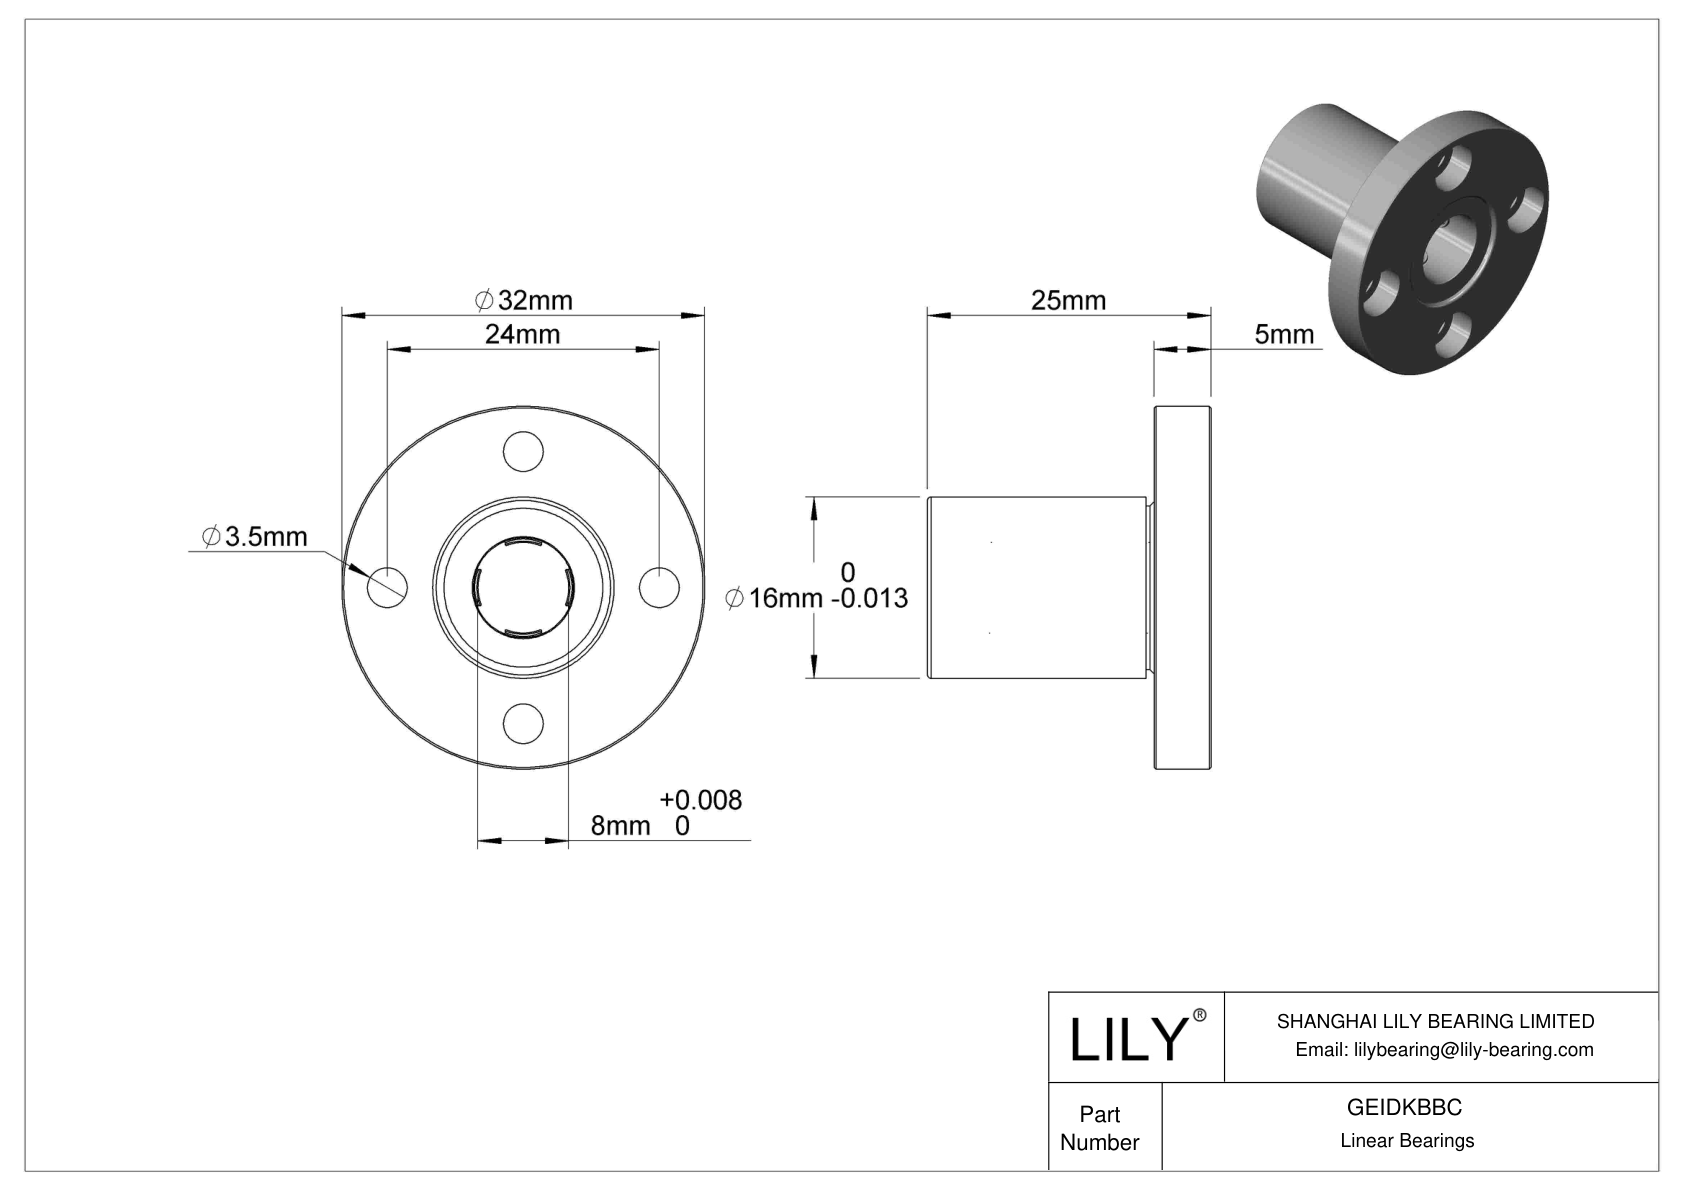 GEIDKBBC Flange-Mounted Linear Ball Bearings cad drawing